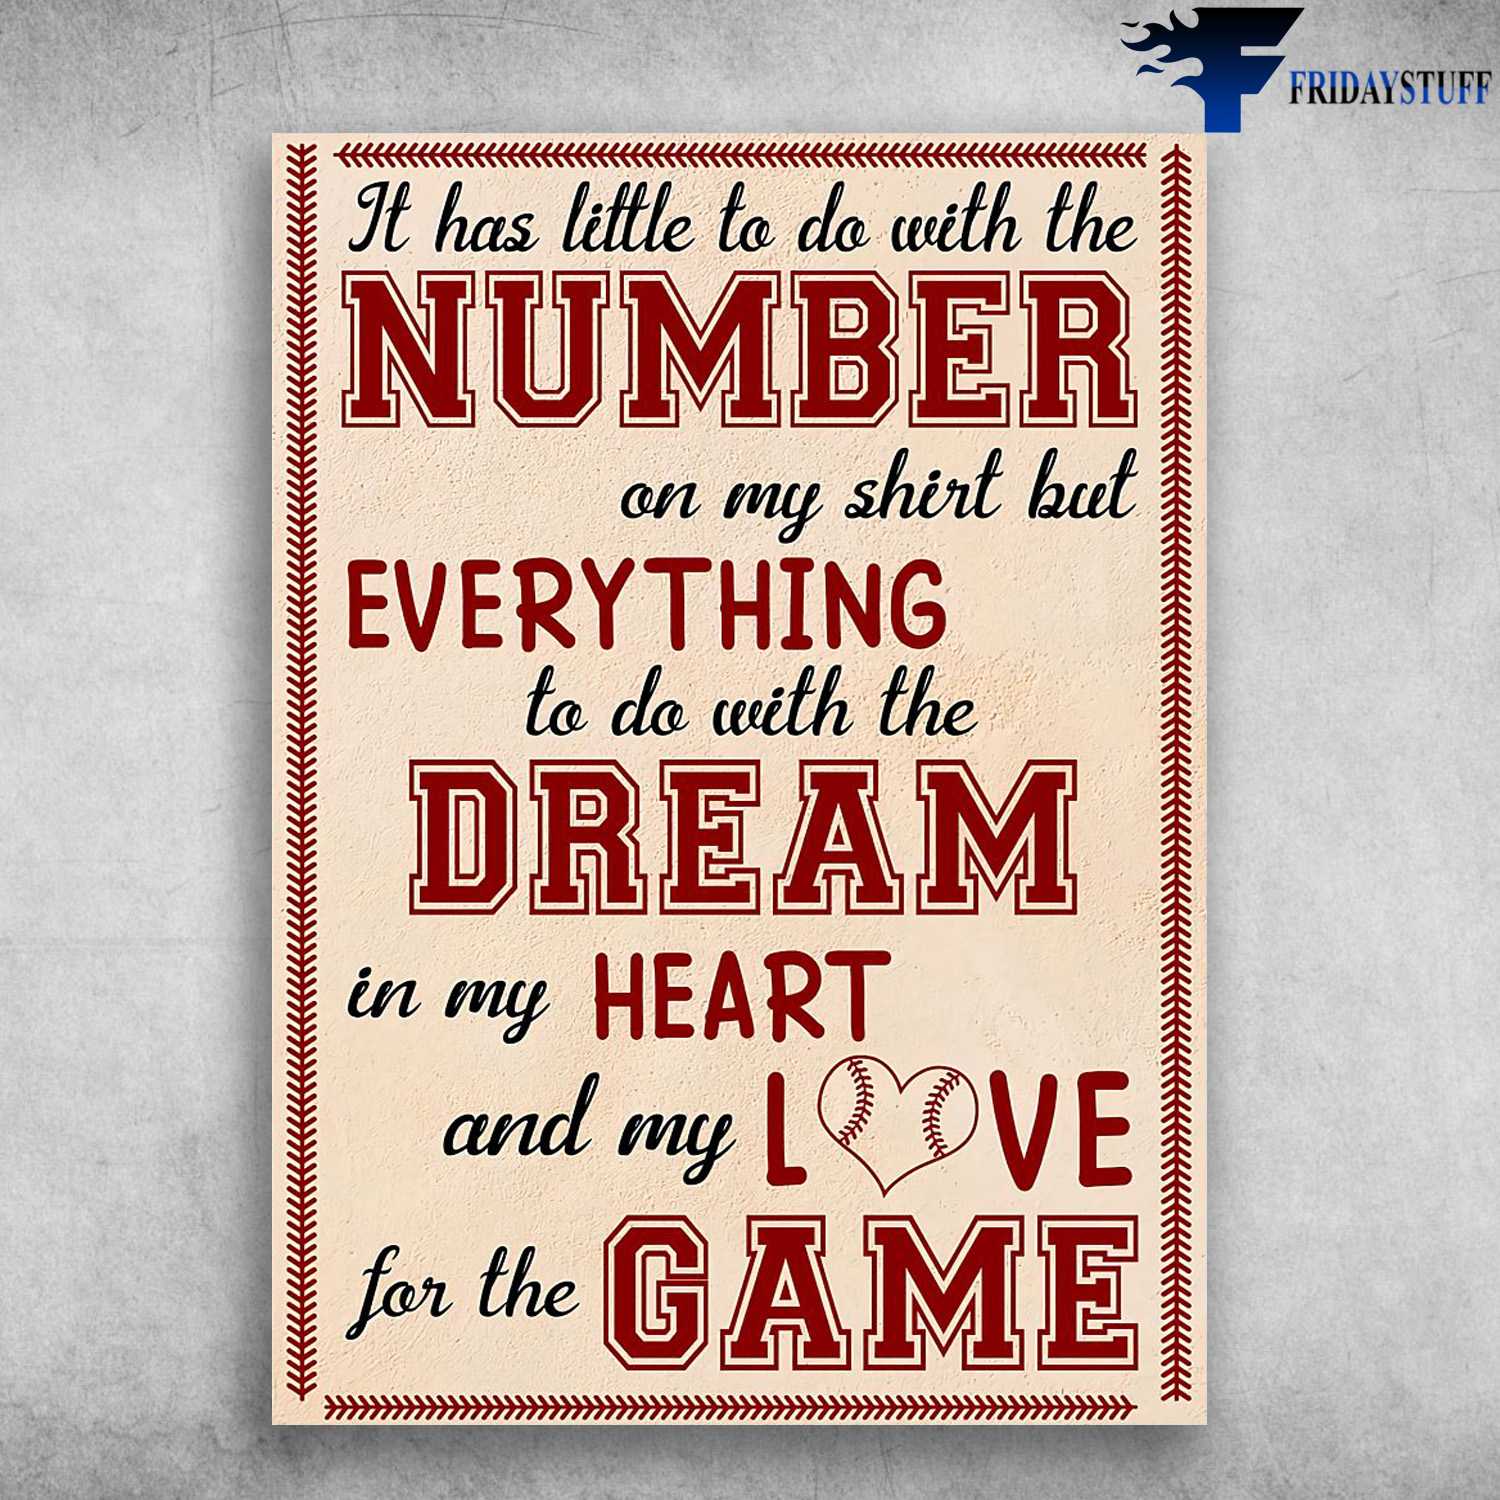 Baseball Poster - It Has Little To Do, With The Number In My Shirt, But Everything To Do With The Dream In My Heart, And My Love For The Game